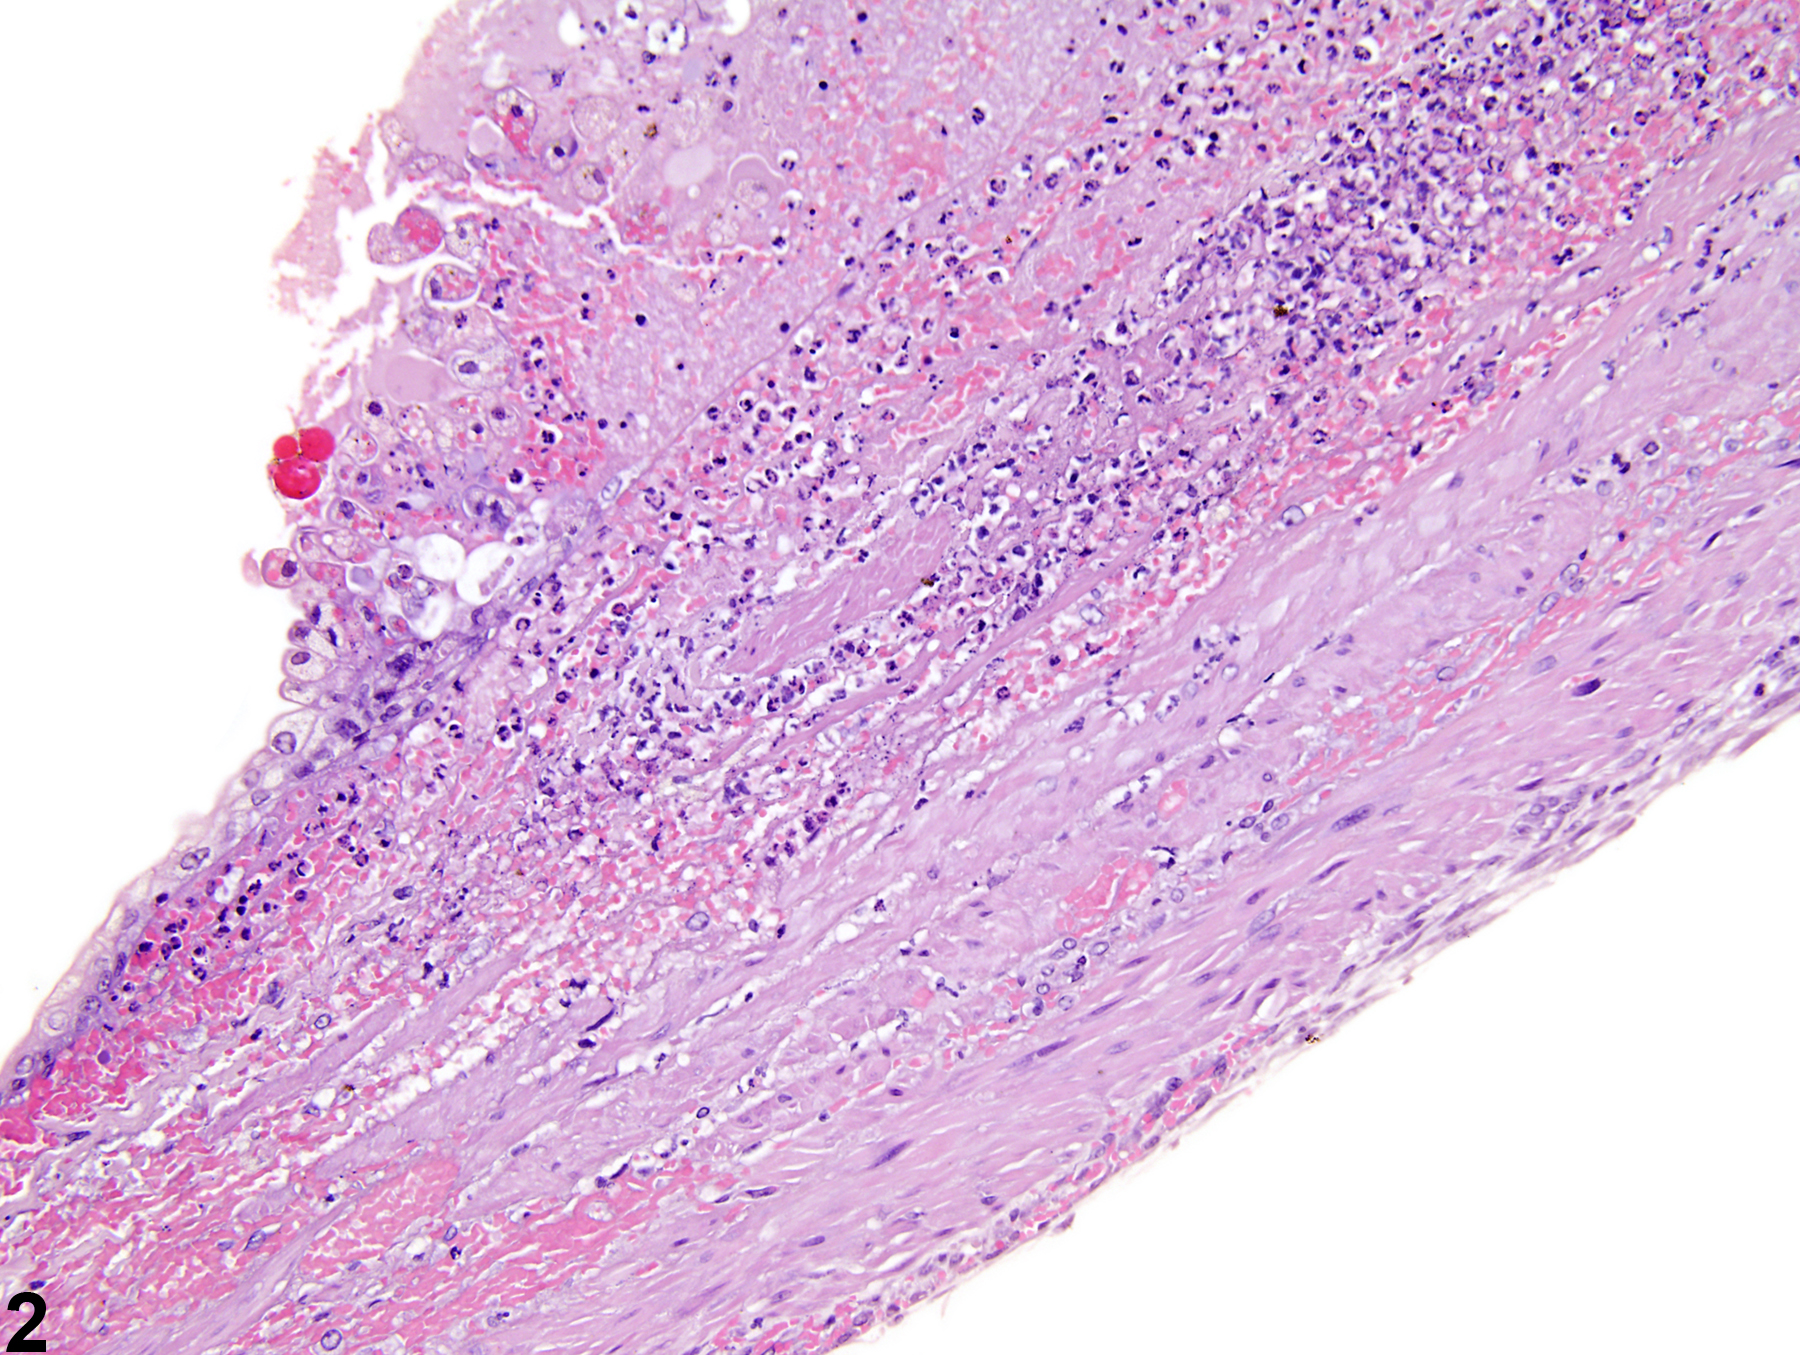 Image of ulcer in the urinary bladder from a male F344/N rat in a chronic study